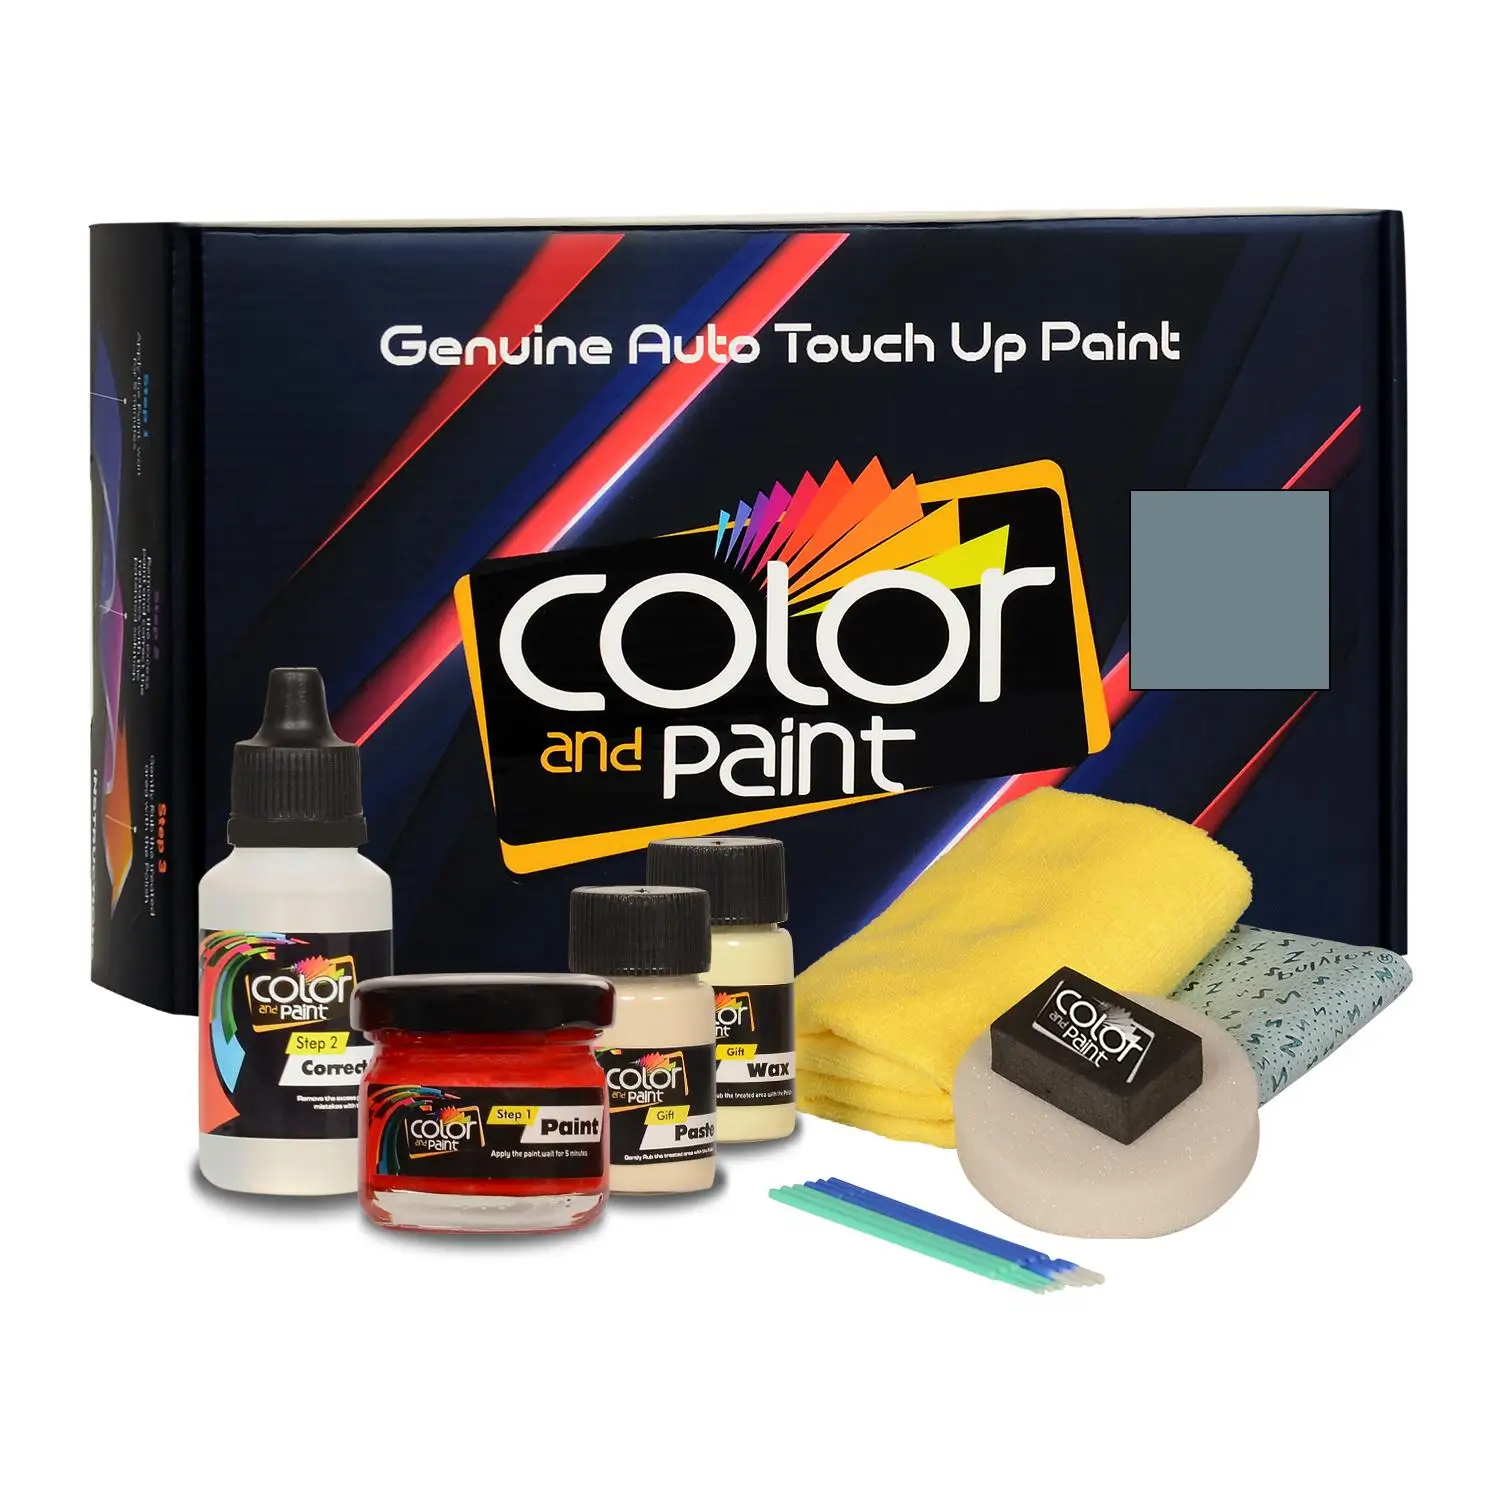 

Color and Paint compatible with Rolls Royce Automotive Touch Up Paint - TUNGSTEN II - R30 - Basic Care